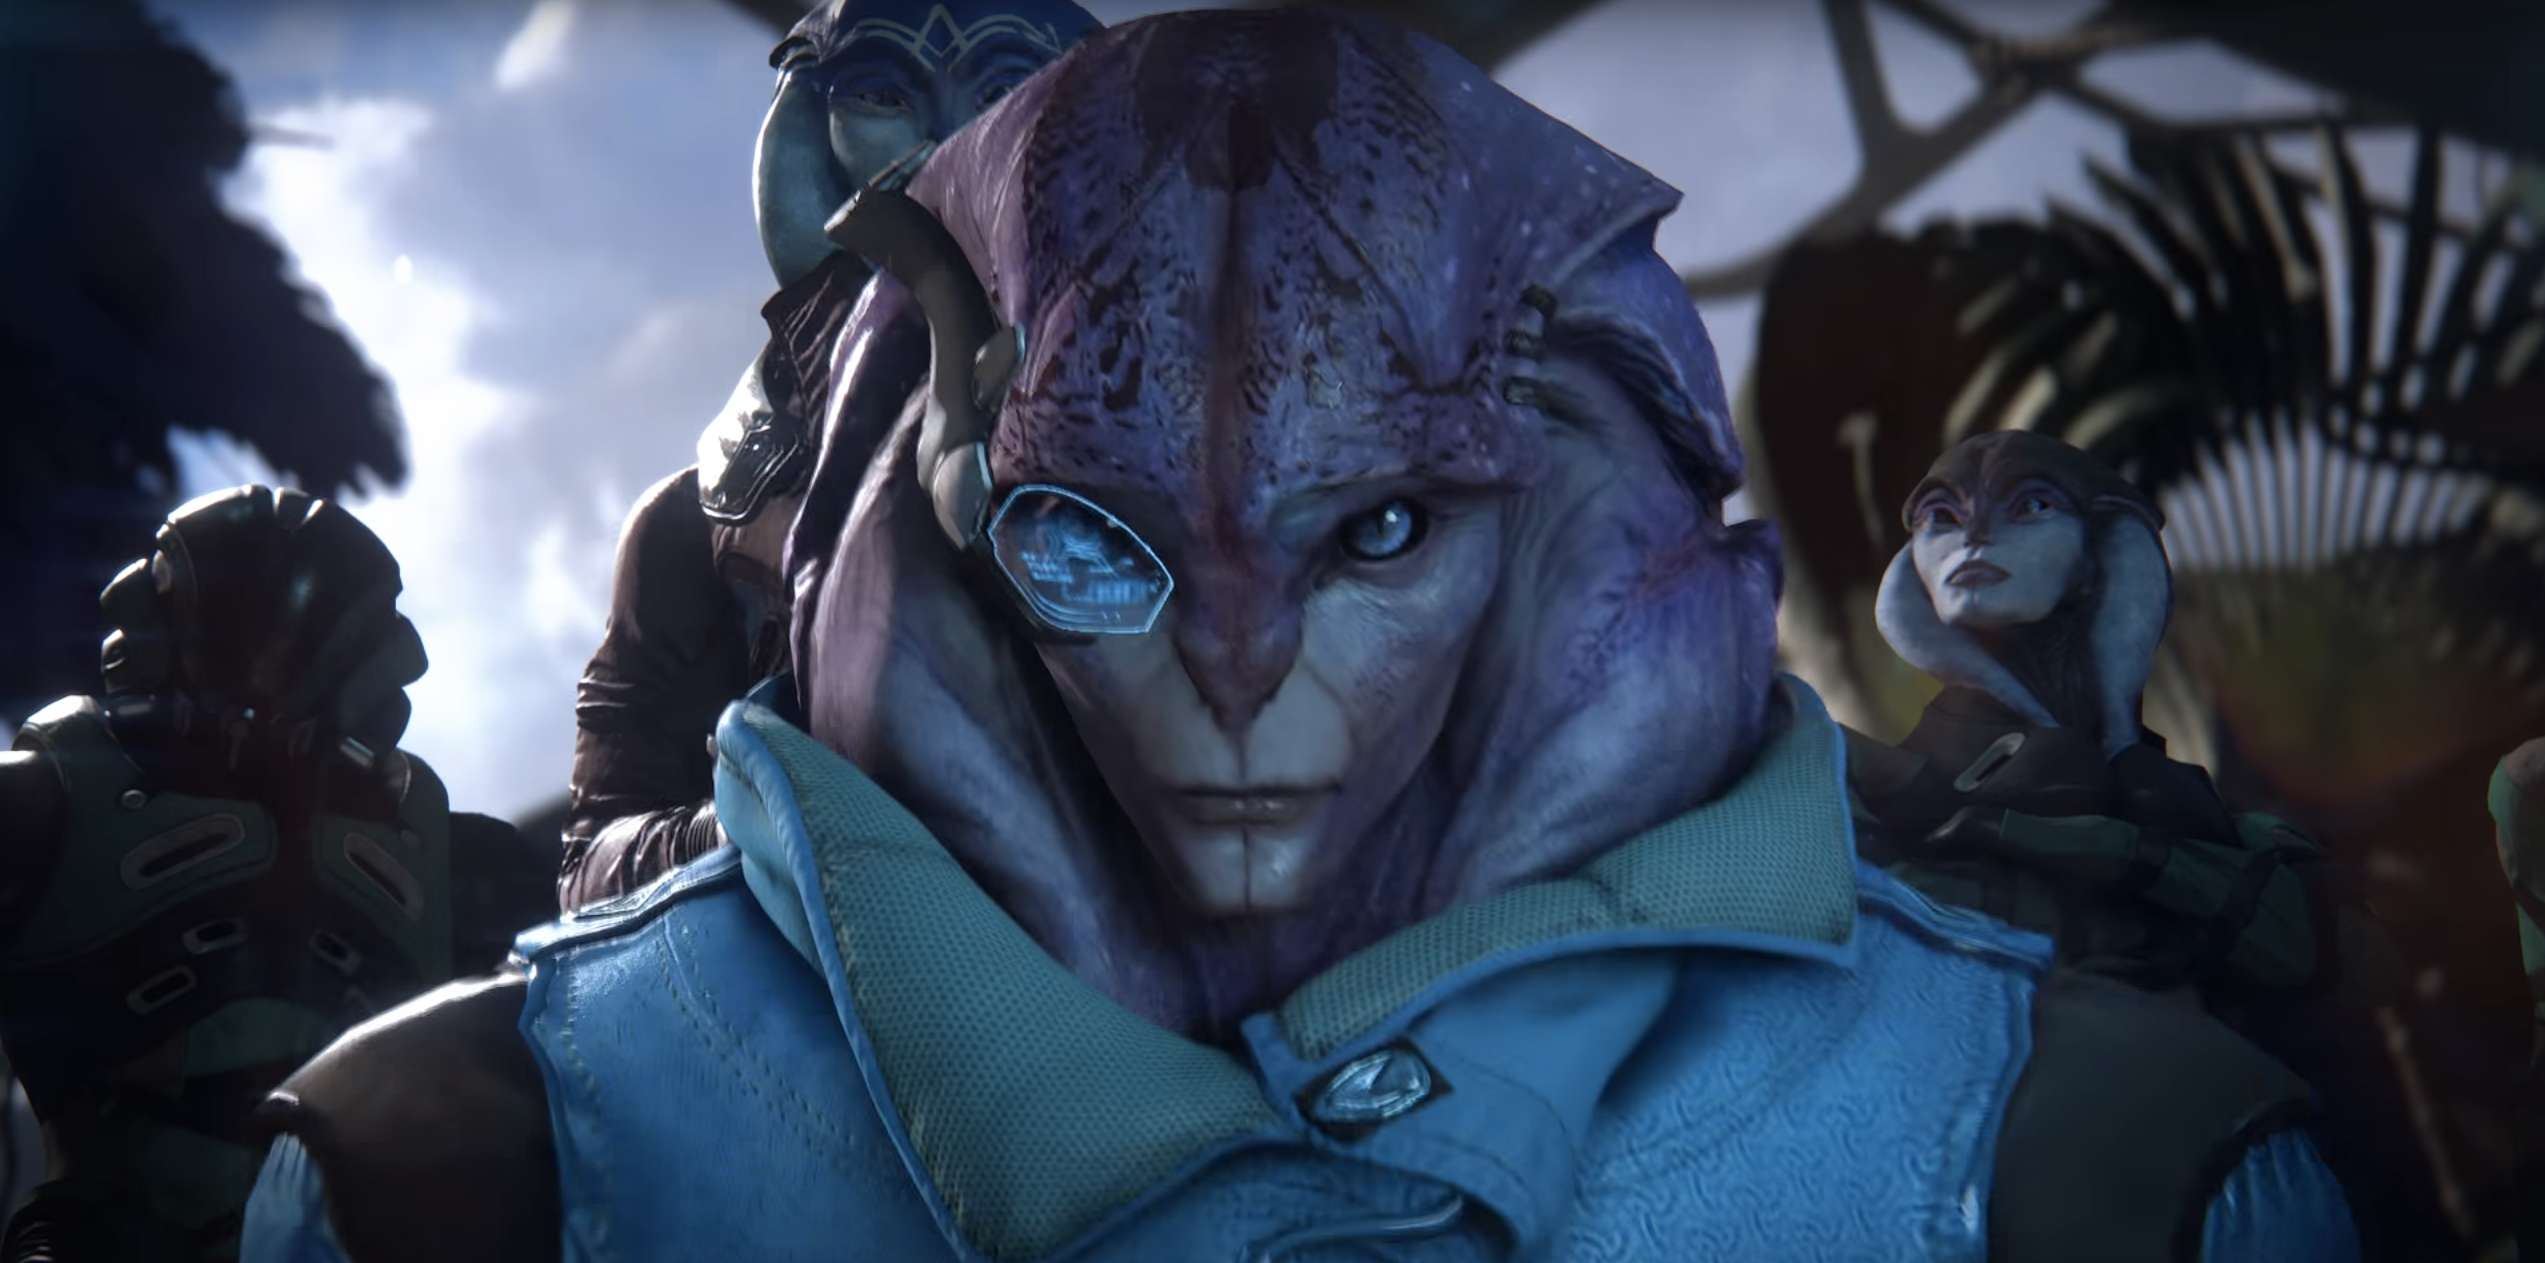 Latest Mass Effect Andromeda Trailer Gives Best Look Yet At New Aliens 